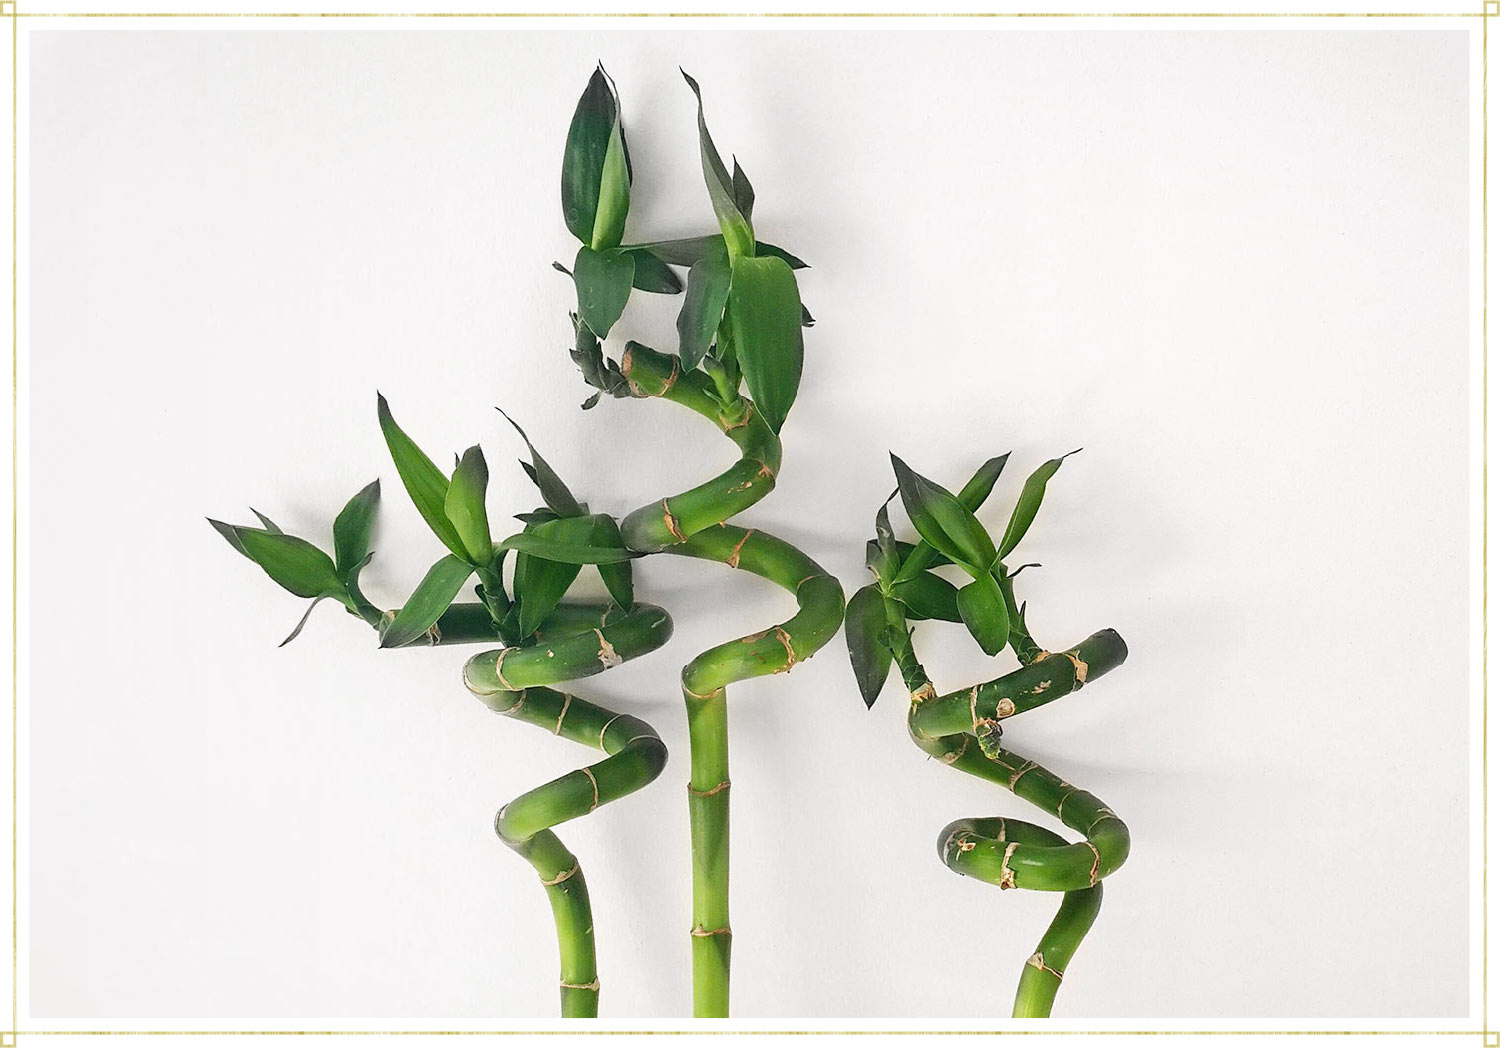 three stalks of spiraled bamboo on a white background